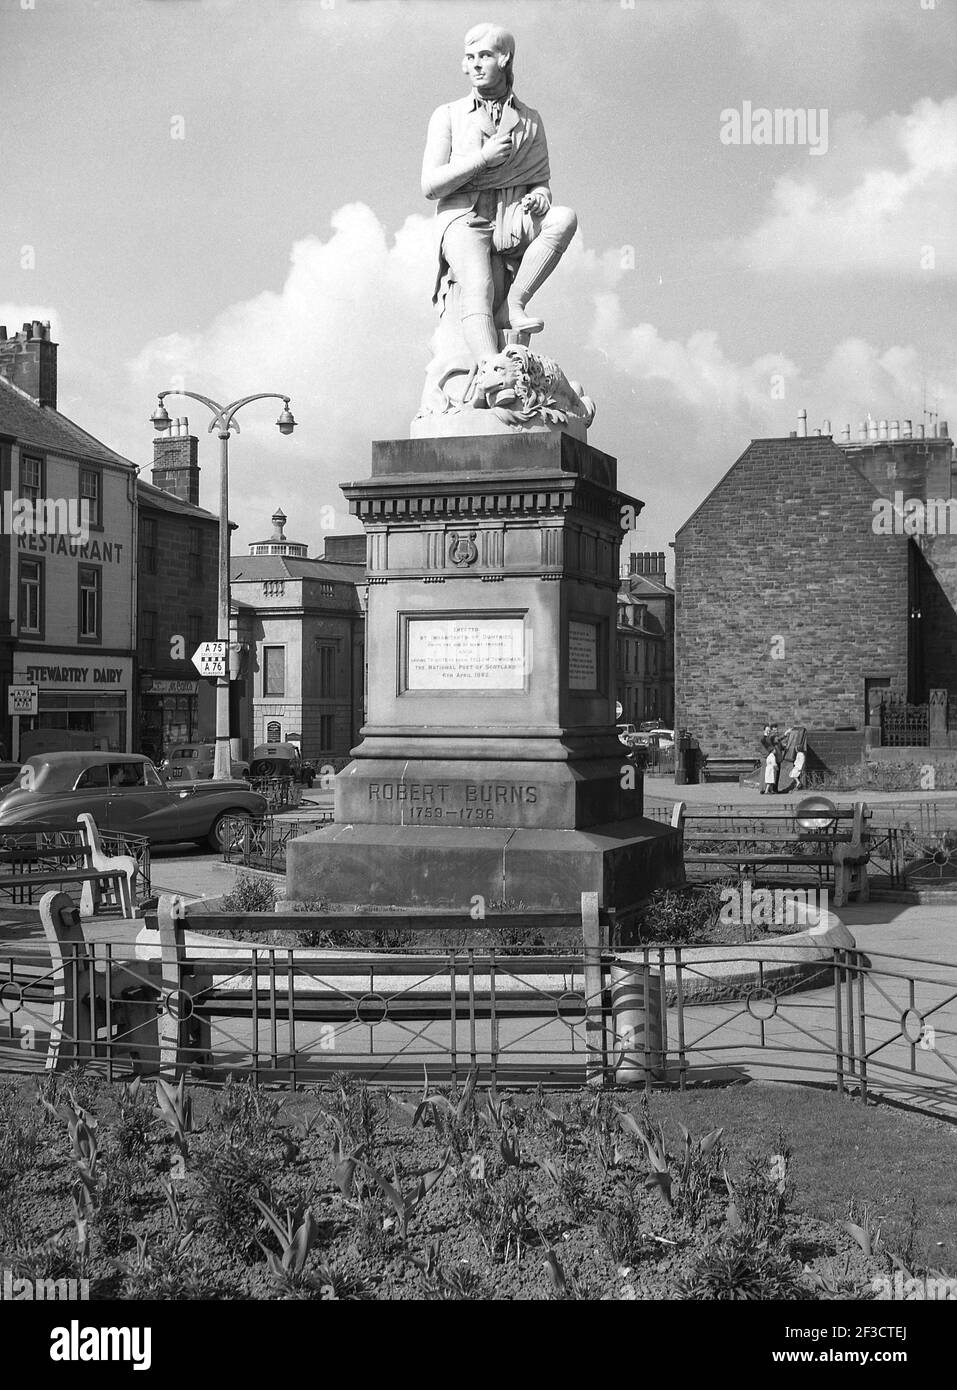 1961, historical, a statue honouring Scottish writer and National Poet, Robert Burns, in the square of the market town of Dumries, Scotland, where he lived from 1791 to 1796. Designed by Amelia Robertson Hill, the statue was sculpted in Carrara, Italy in 1882. Stock Photo